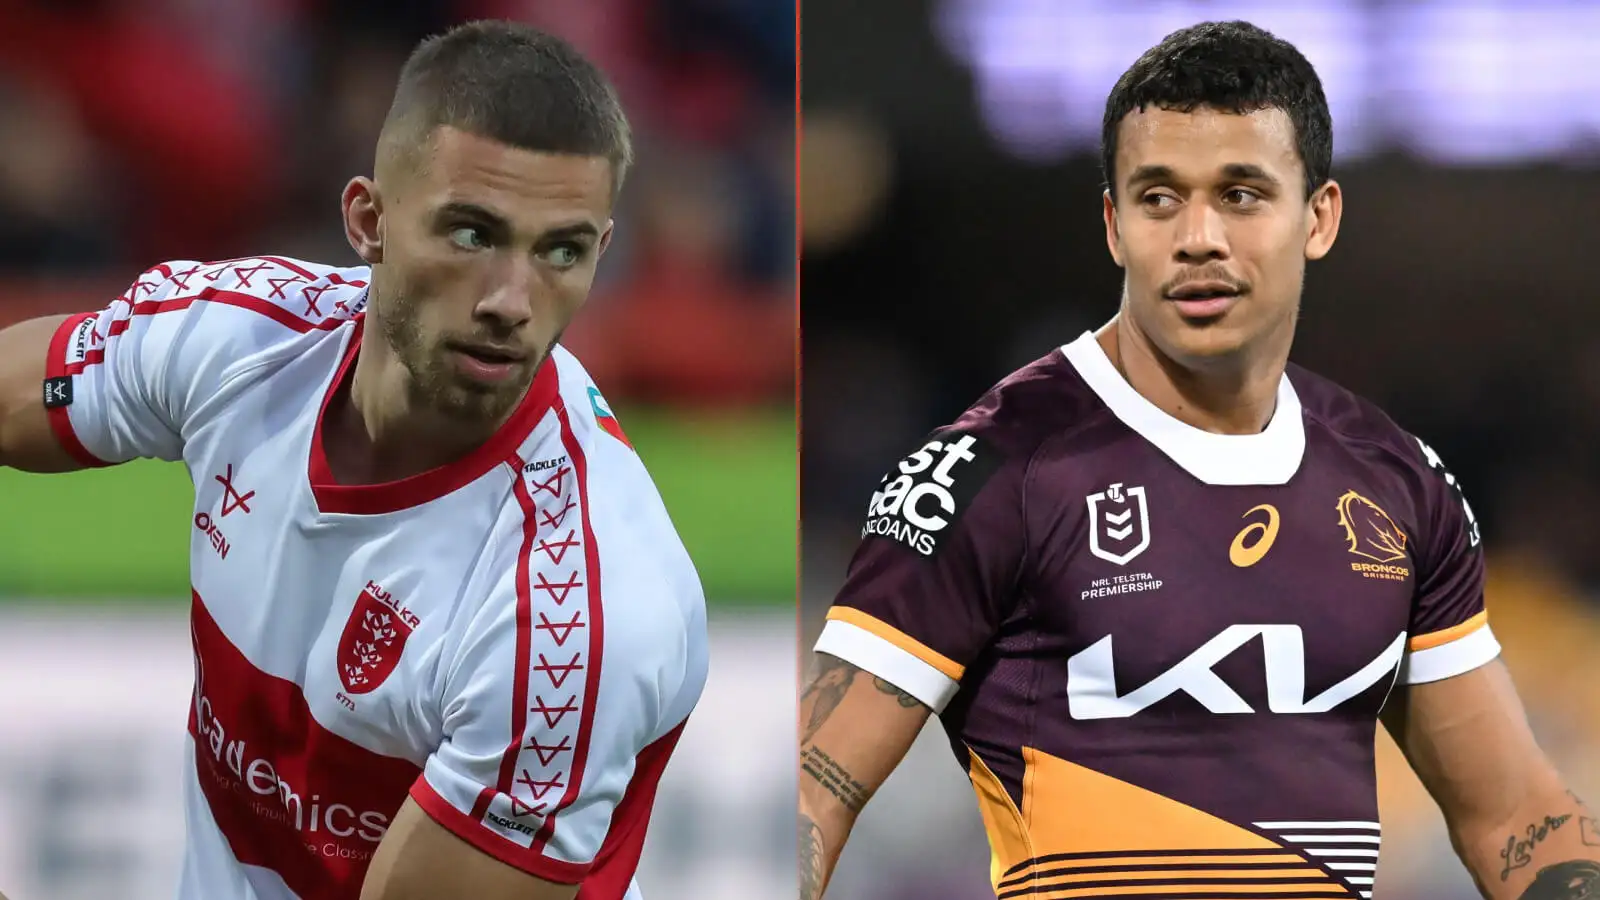 Rumour Mill: Former Leeds star agrees explosive switch; Brisbane Broncos speedster heading to Super League; axe falls on ex-Rhinos coach